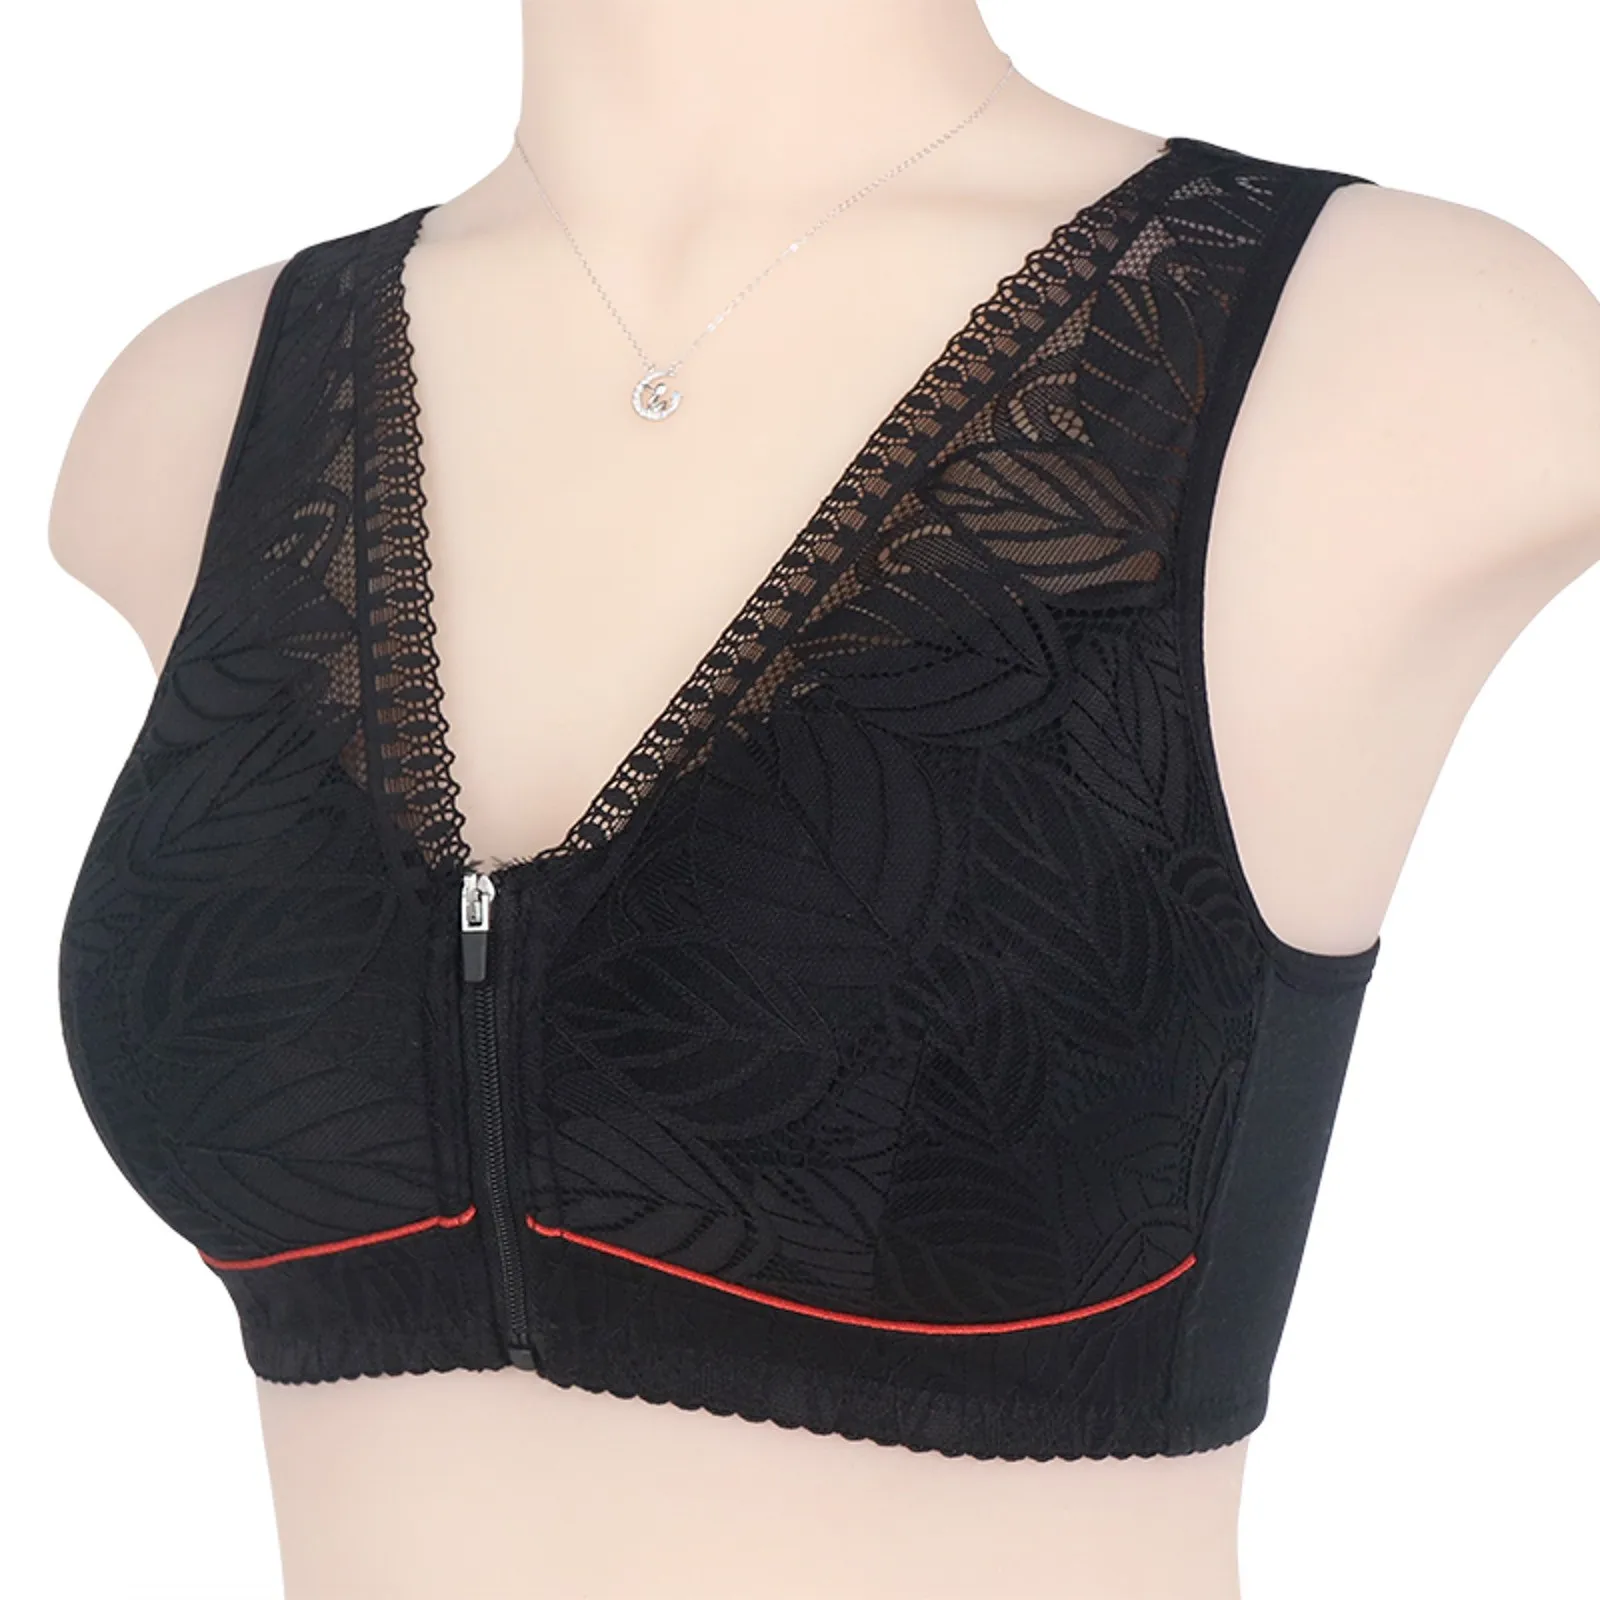 https://ae01.alicdn.com/kf/Seb81b9ab32b149dca3a03b3d5571cae1H/Bras-For-Women-Soft-Cup-Front-Zipper-Middle-Aged-And-Elderly-Underwear-Ladies-No-Steel-Ring.jpg